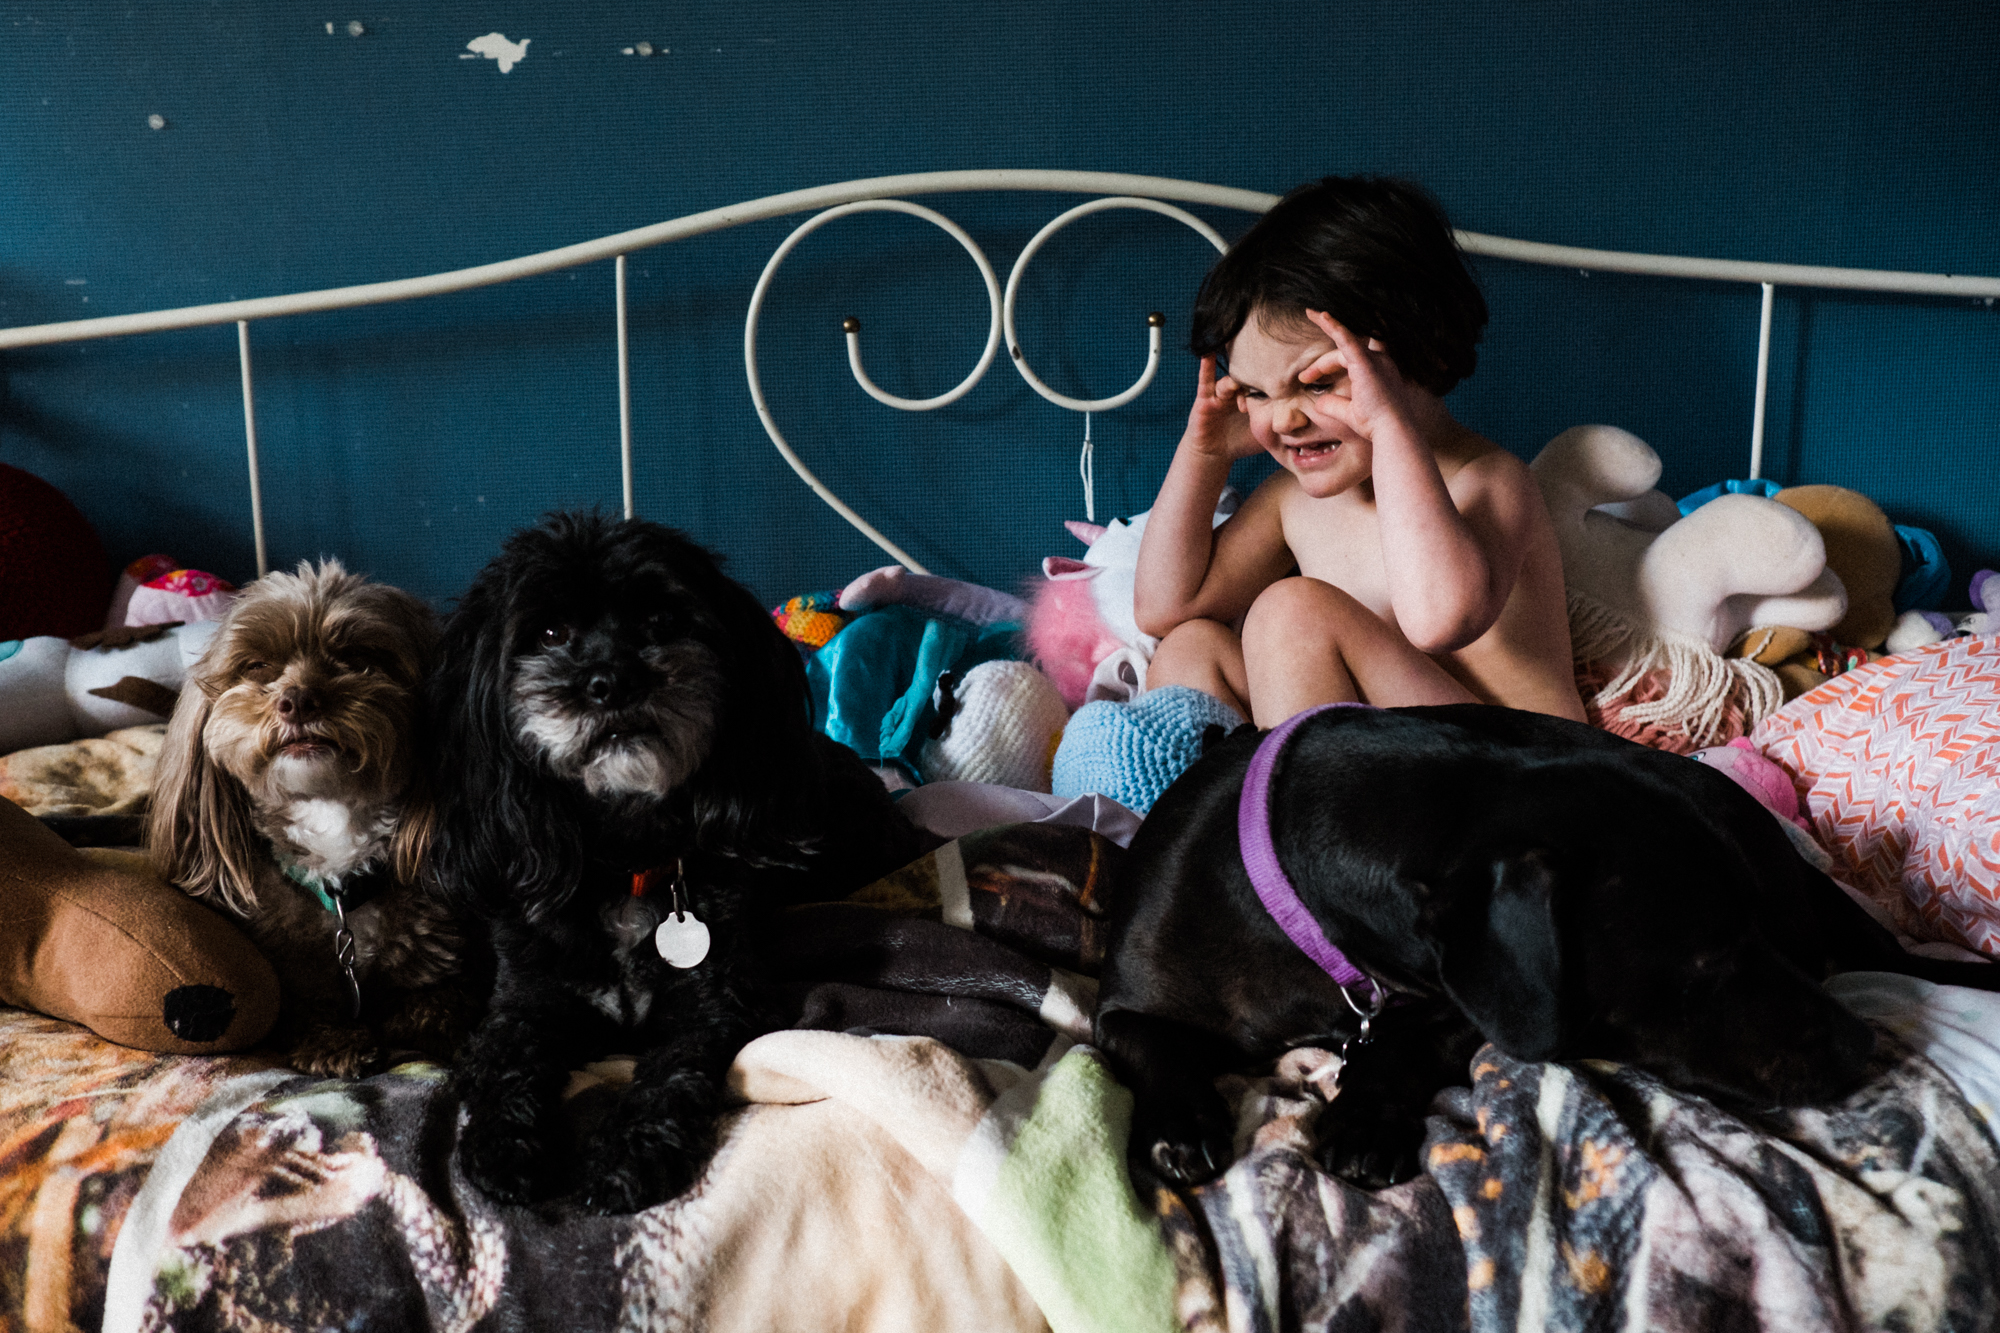 girl makes faces at dog on bed - Documentary Family Photography